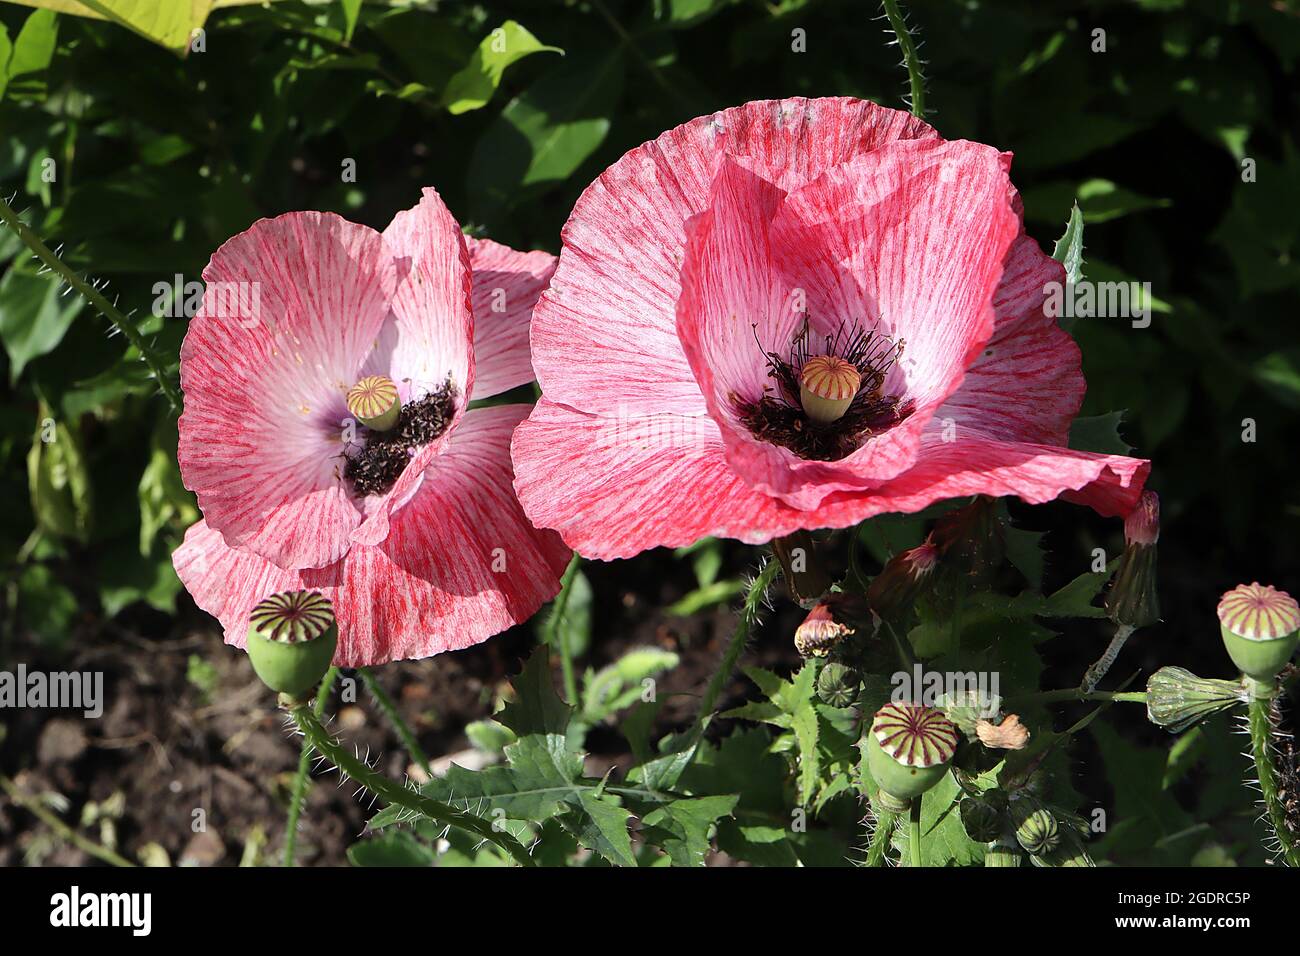 Papaver rhoeas Shirley Double Mixed corn poppy ‘Shirley Double Mixed’ – mottled red pink and white flowers with creased petals,  July, England, UK Stock Photo